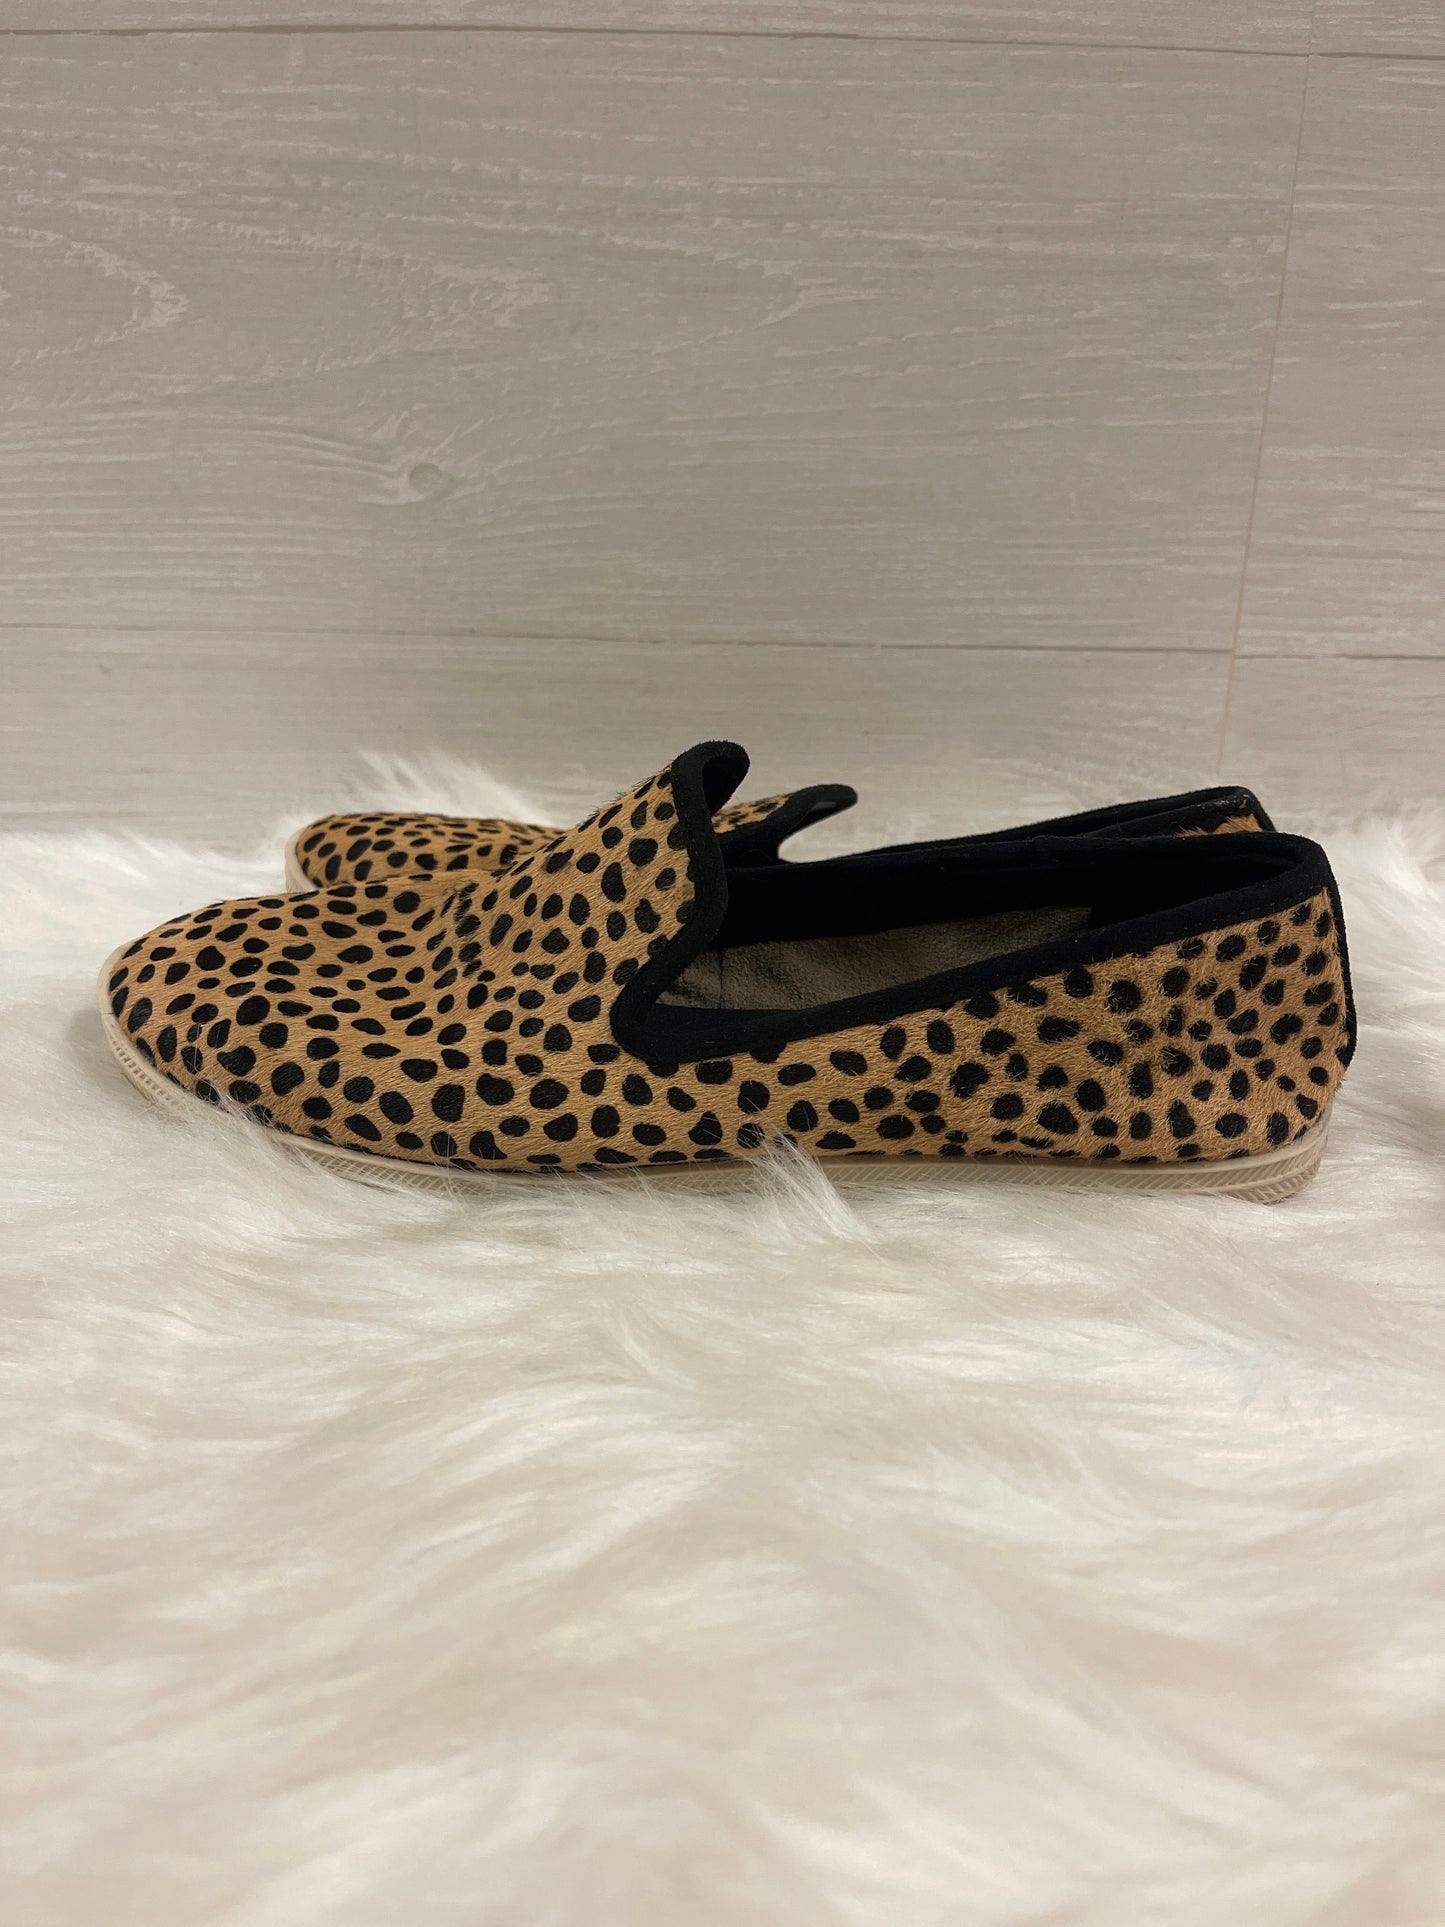 Shoes Flats Other By Gianni Bini  Size: 10